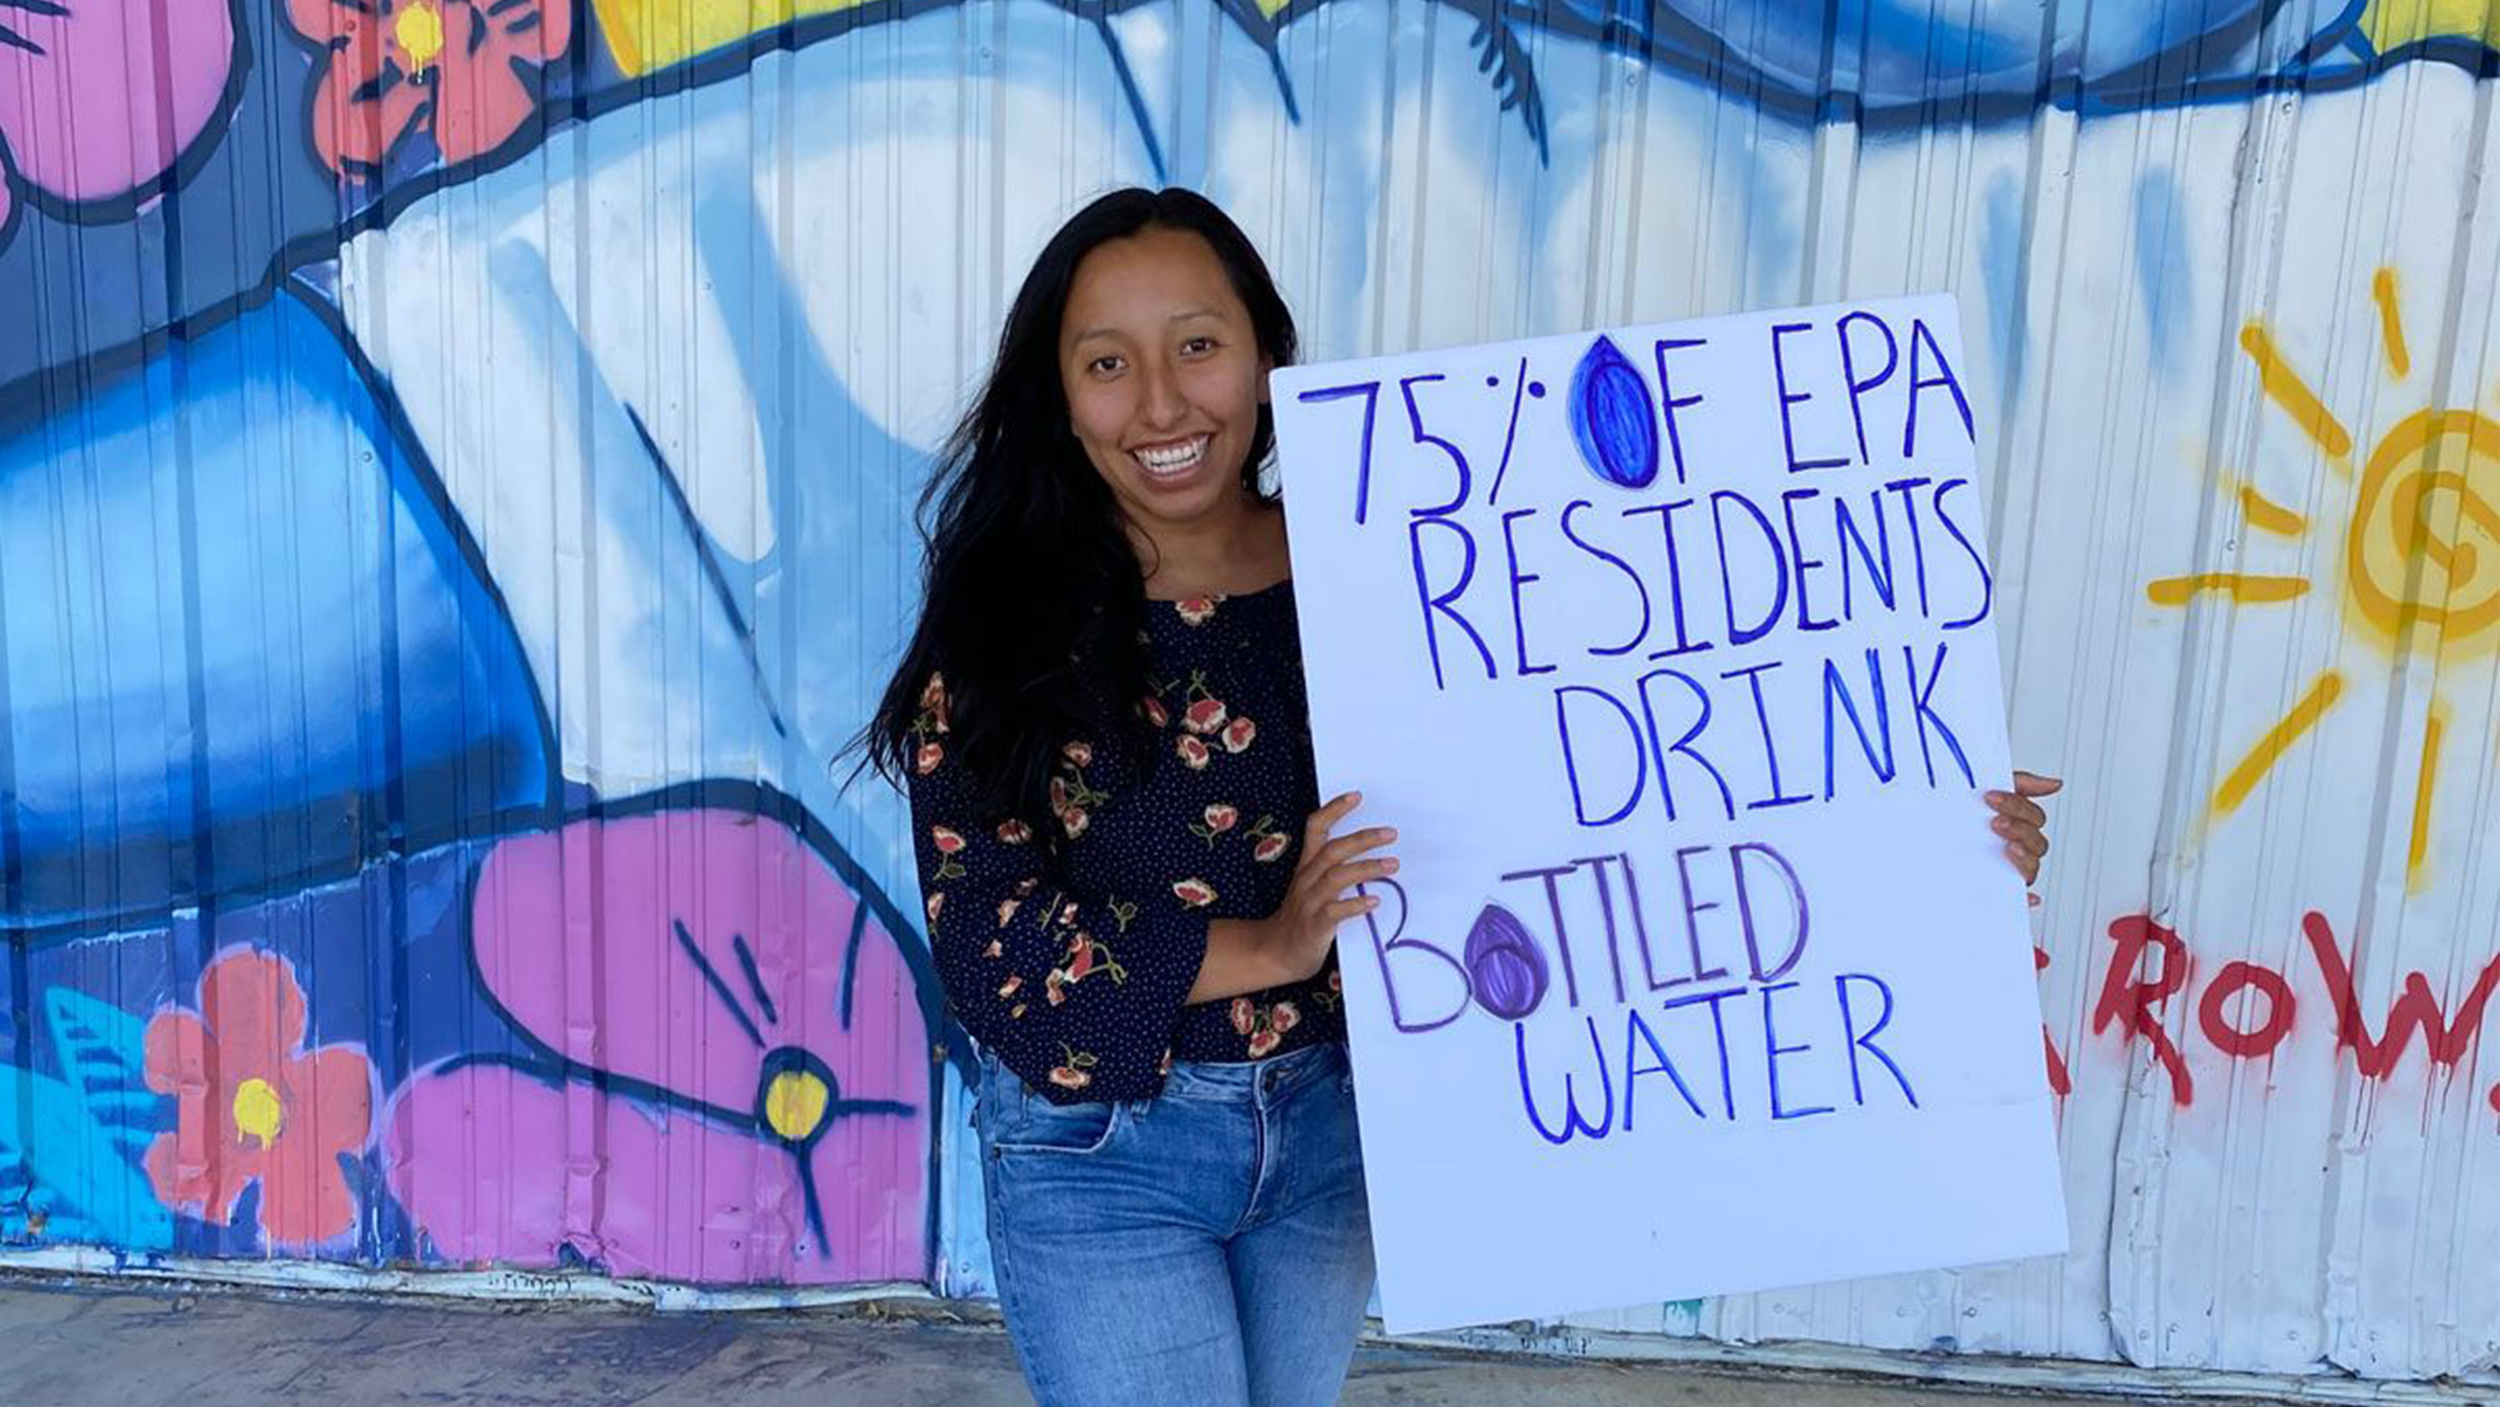 Lotus helped Nuestra Casa conduct surveys and tap water testing in East Palo Alto communities